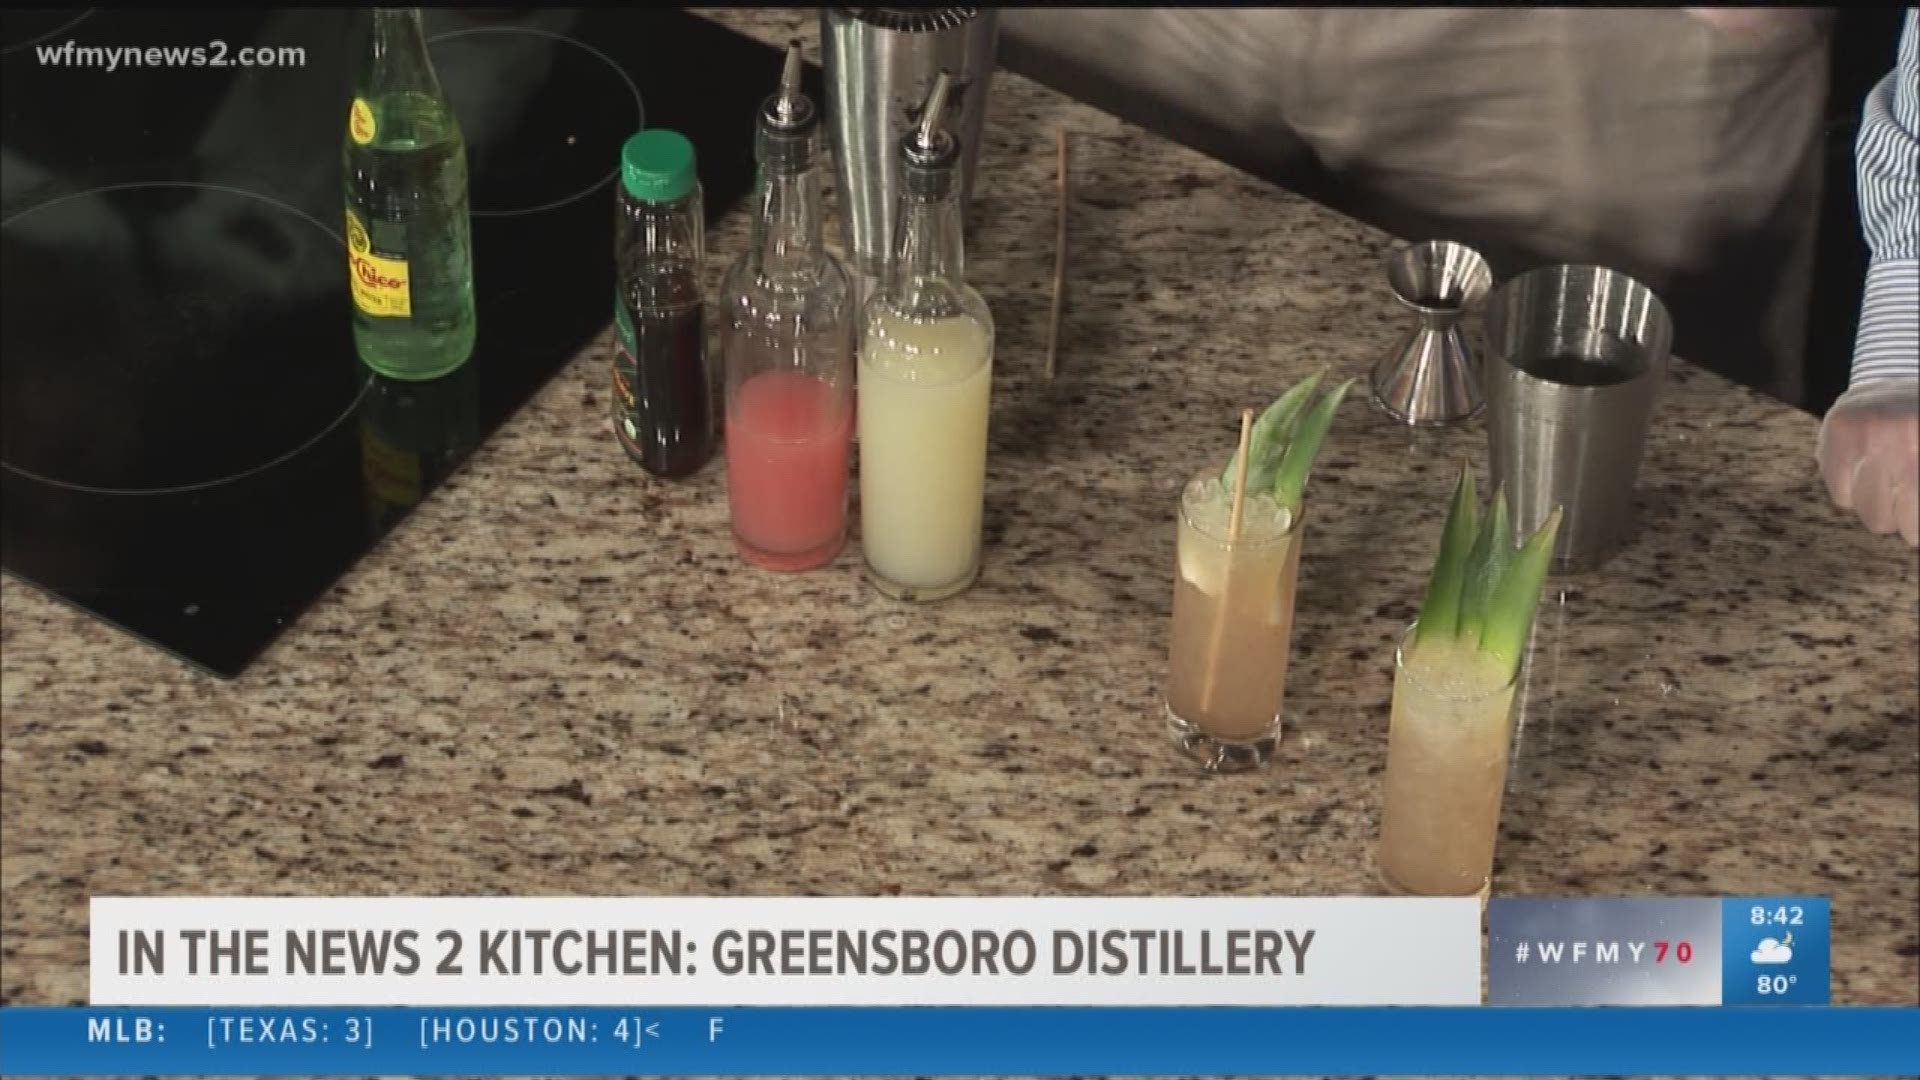 We’re eating and drinking local with Gia and Greensboro Distillery